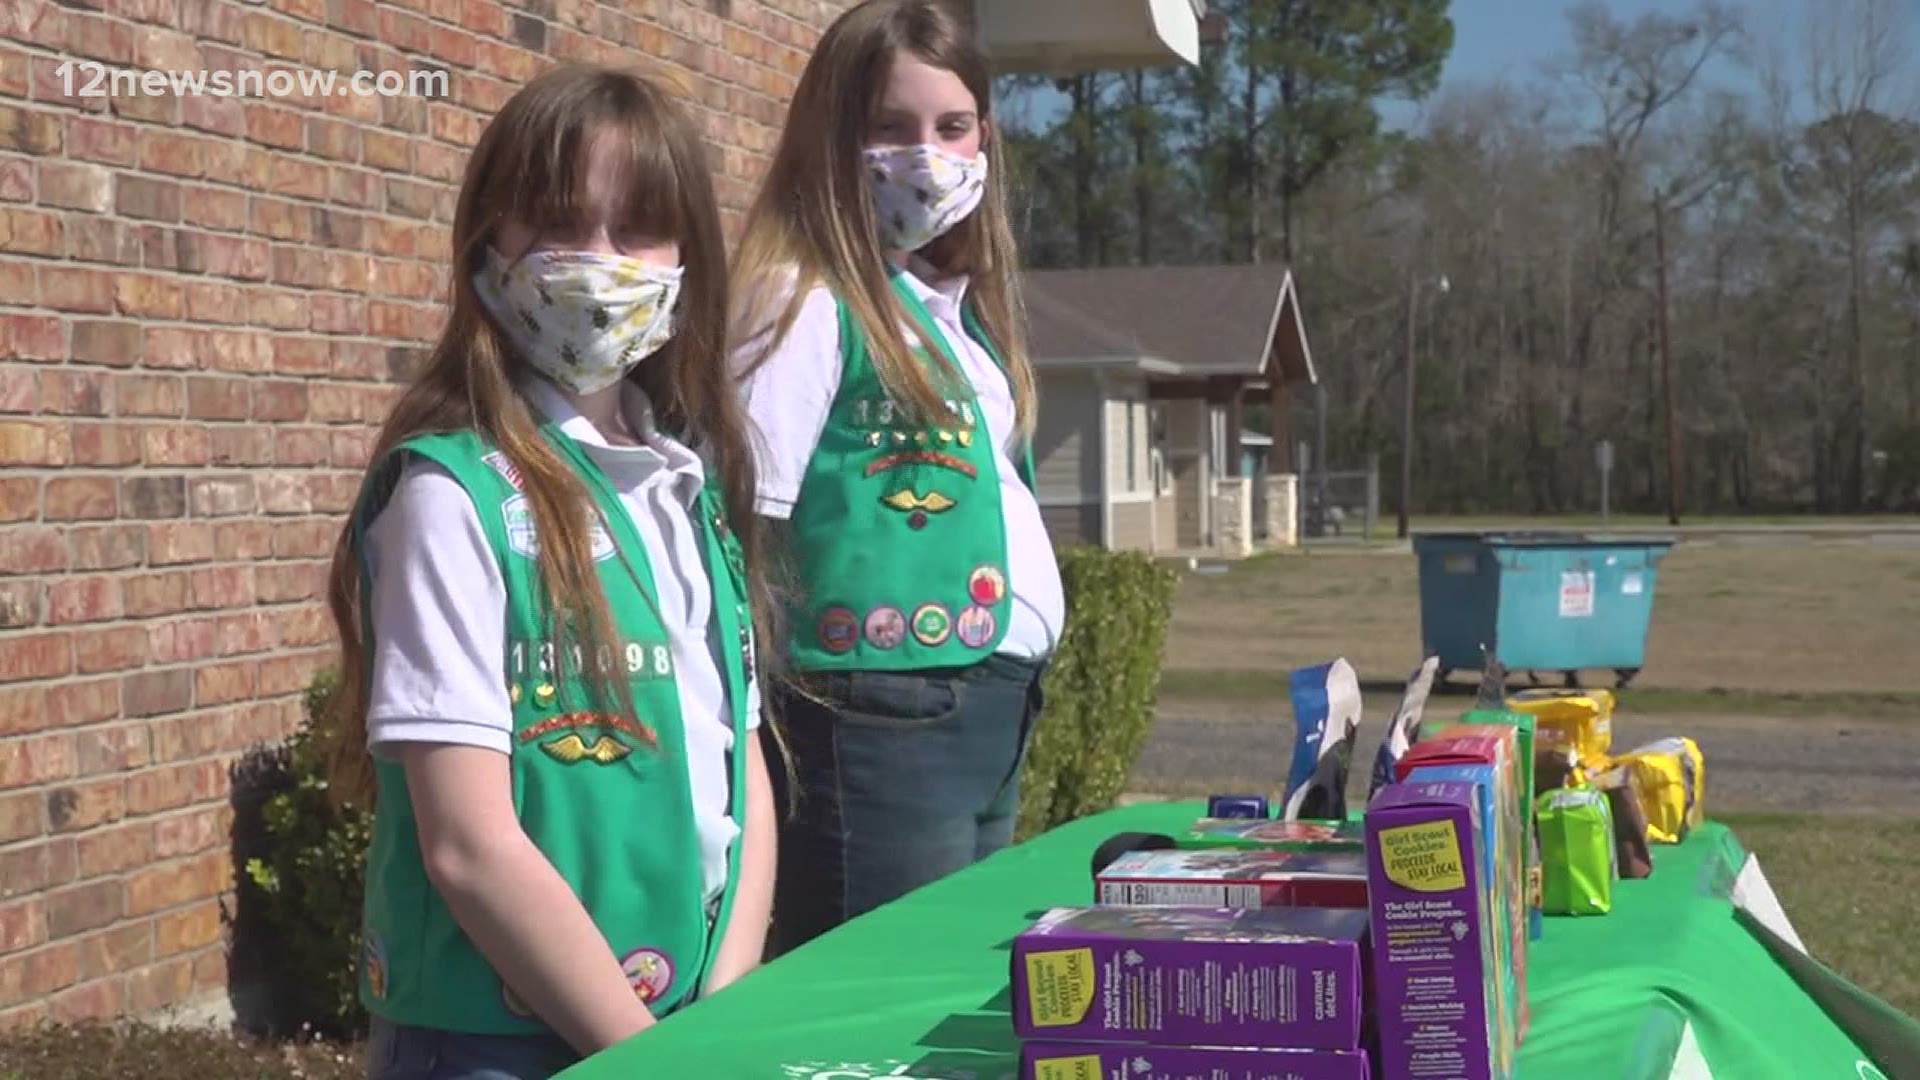 The pandemic is making it a bit harder for the Girl Scouts to come knocking on doors.